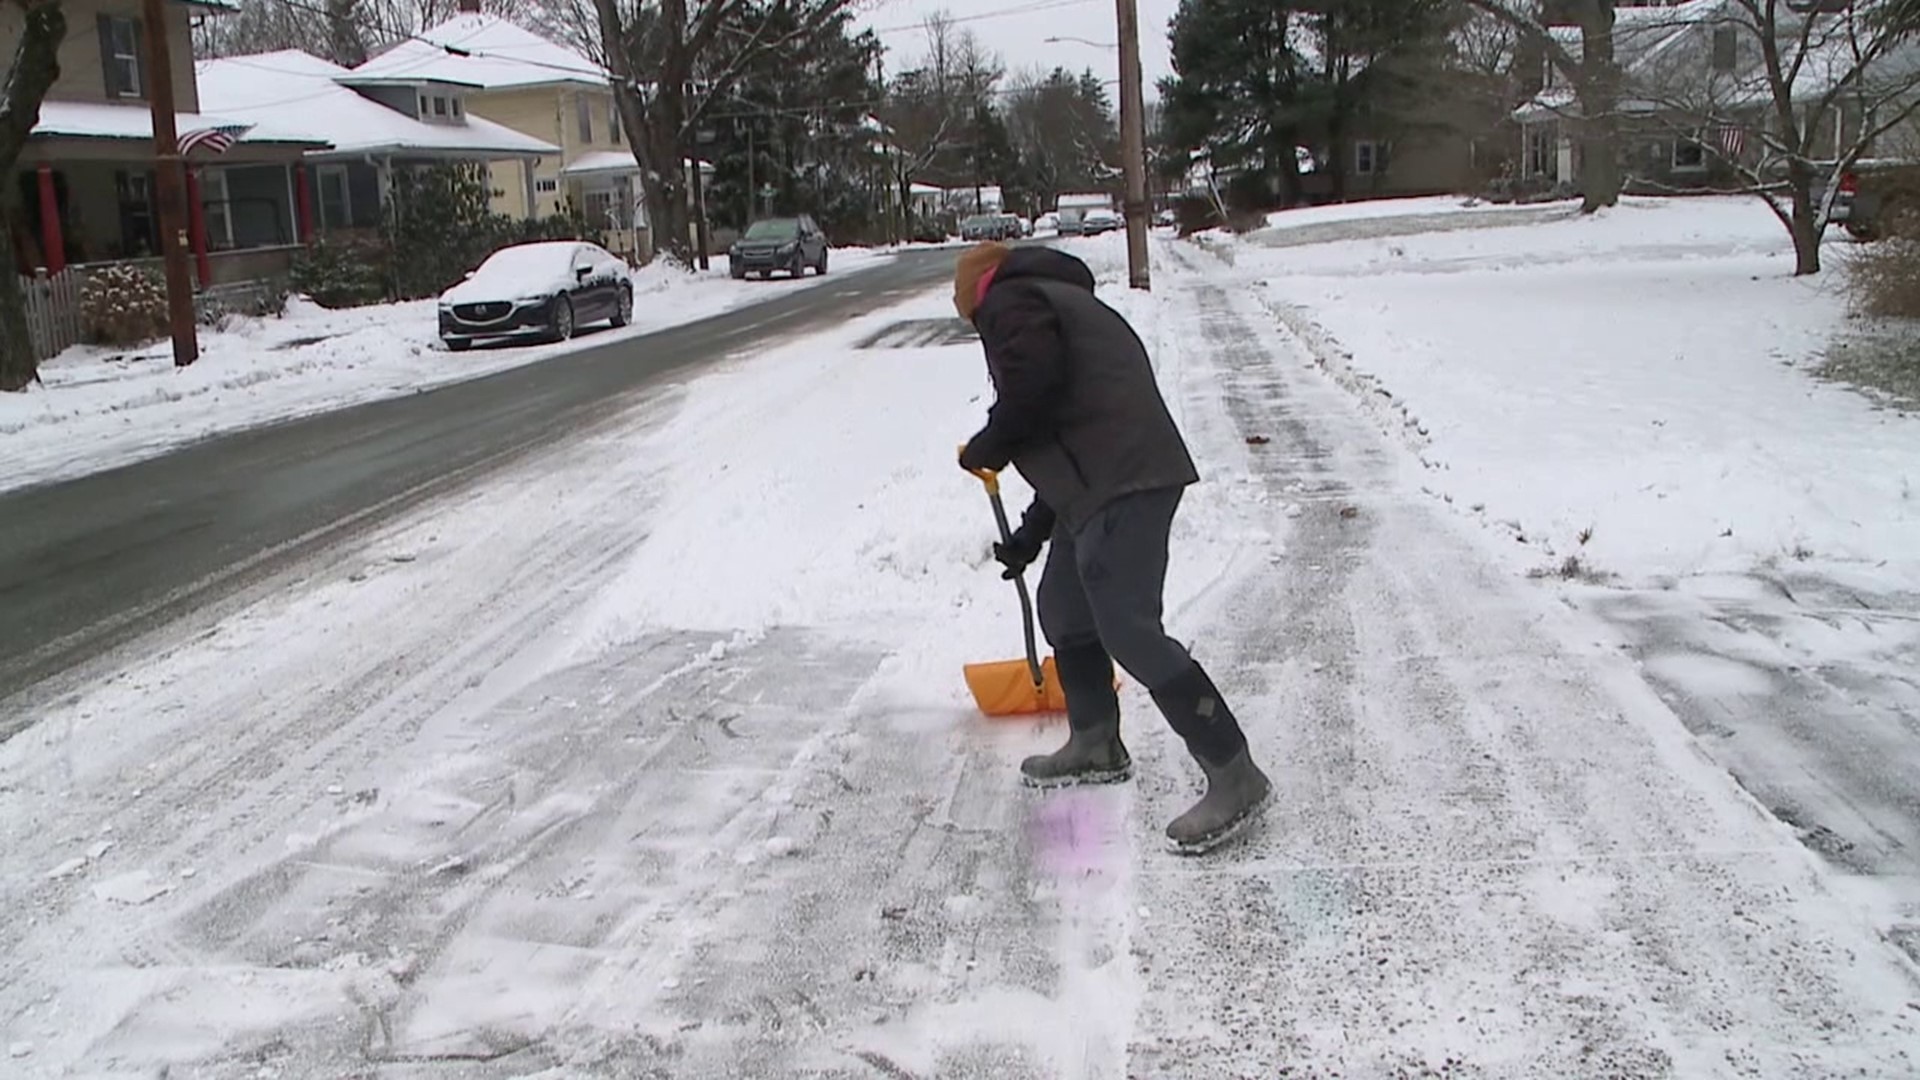 Residents in Monroe County spent their Saturday cleaning up after the winter blast that took place overnight, but folks say it wasn't anything they couldn't handle.